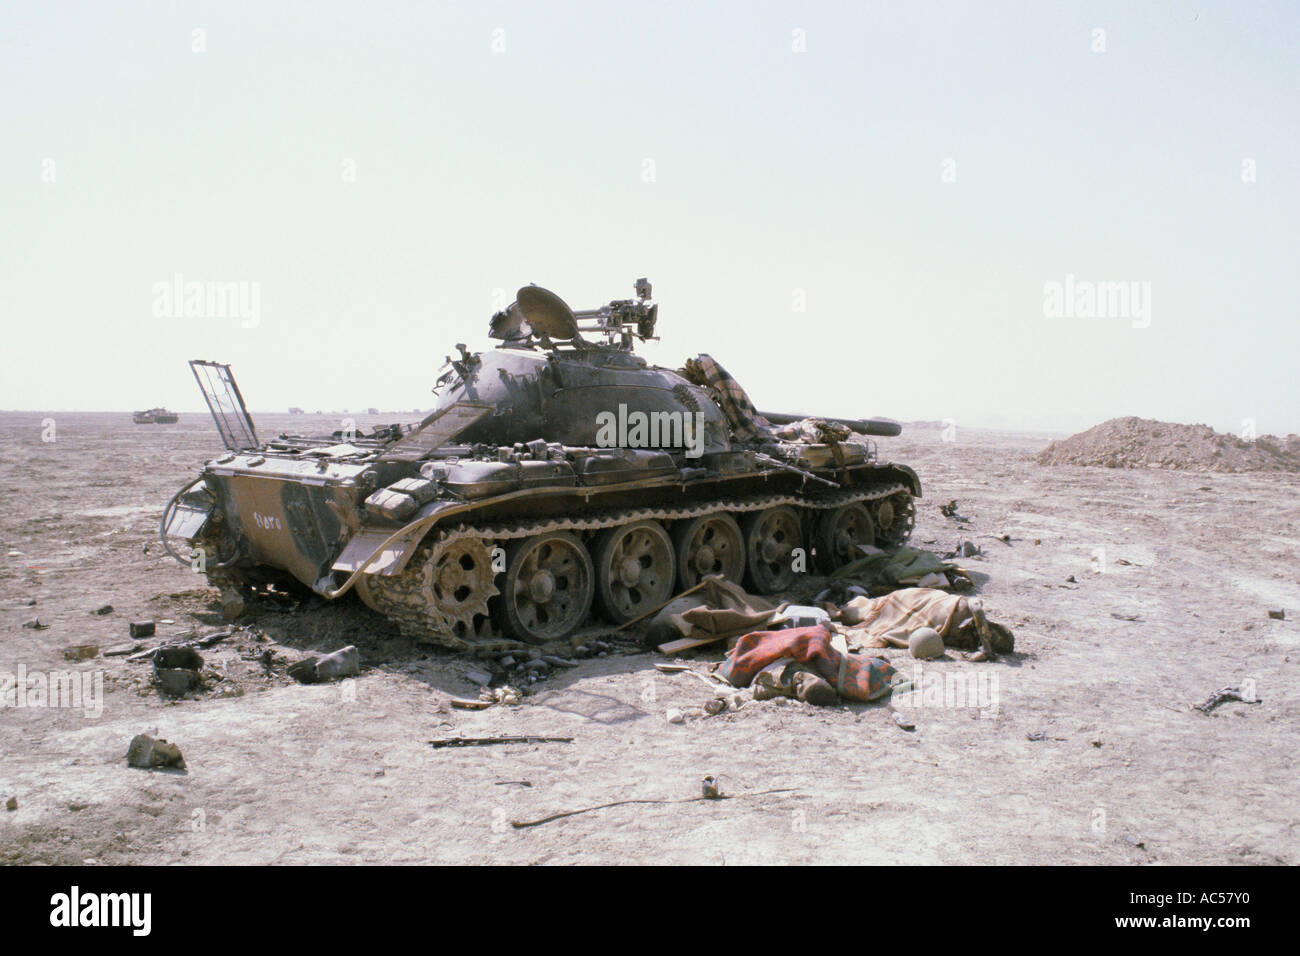 IRAN IRAQ WAR 1982 DEMOLISHED TANK AND DEAD SOLIDERS COVERED BY BLANKETS 1982 Stock Photo